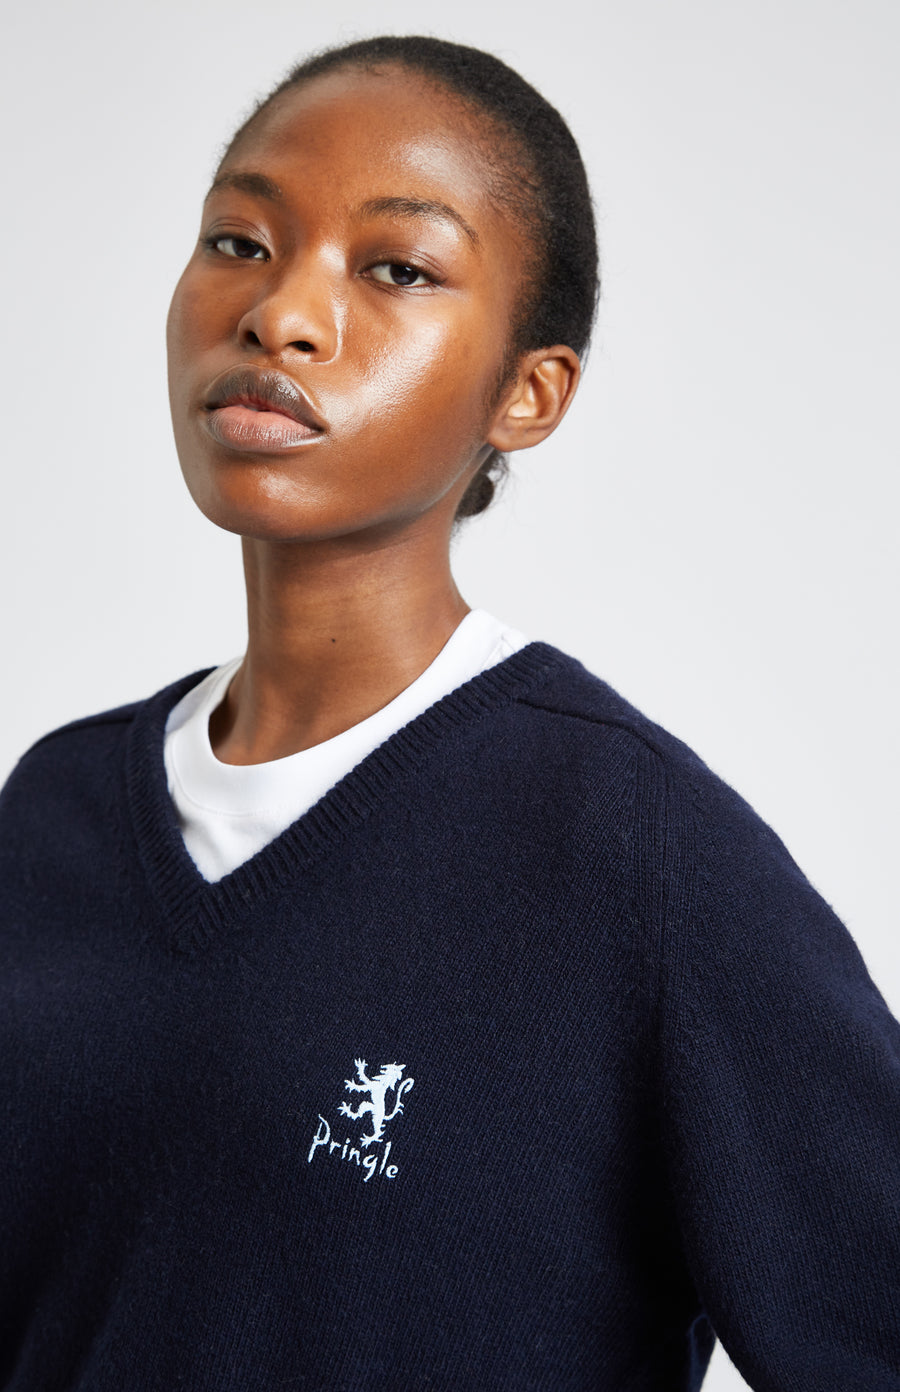 Pringle of Scotland Archive Women's V neck Lambswool Jumper In Navy showing embroidery